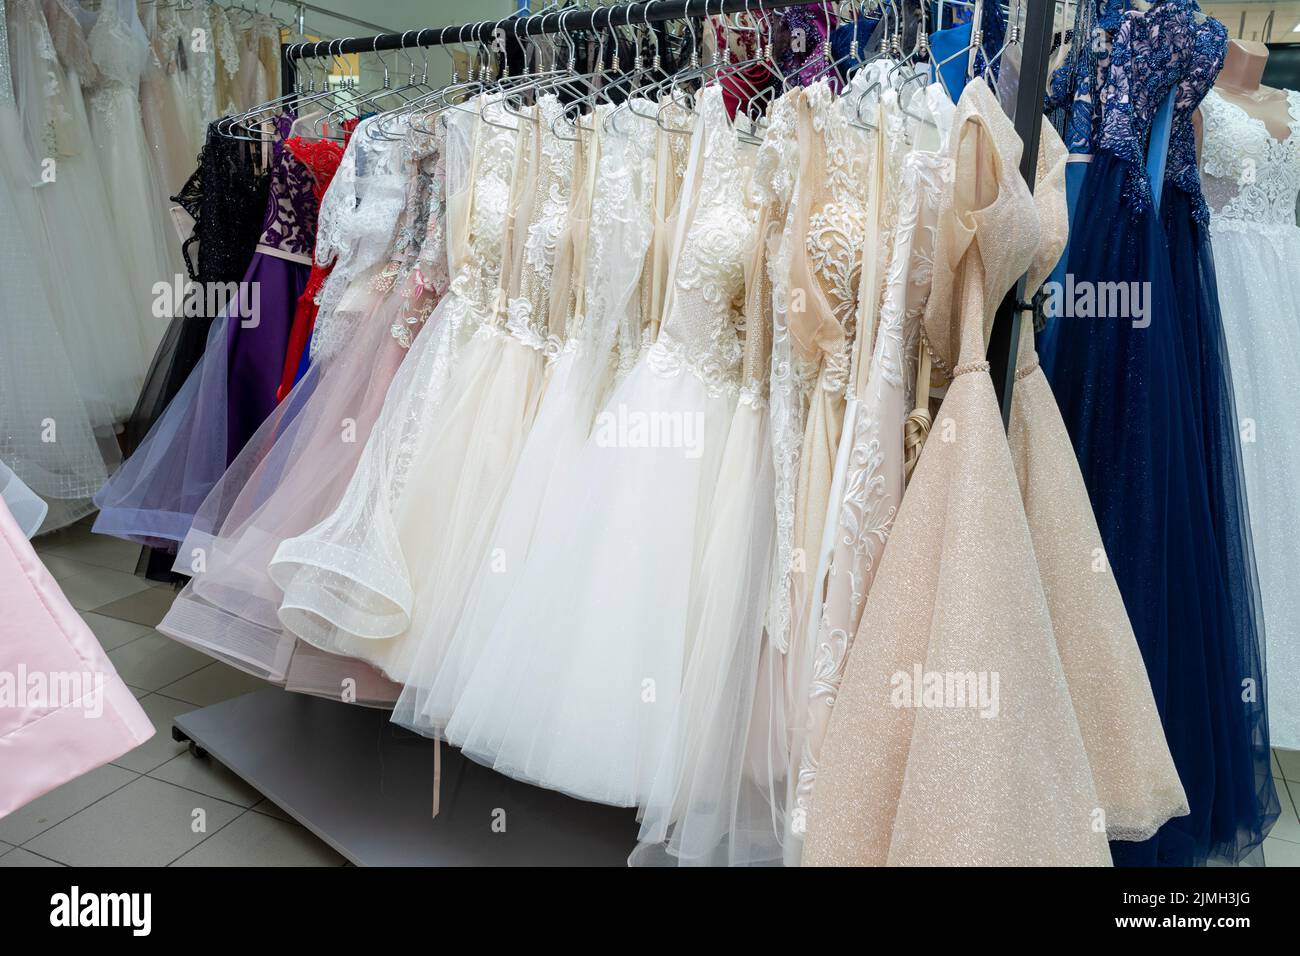 Many different evening dresses and bridal dresses on a hanger in the store Stock Photo